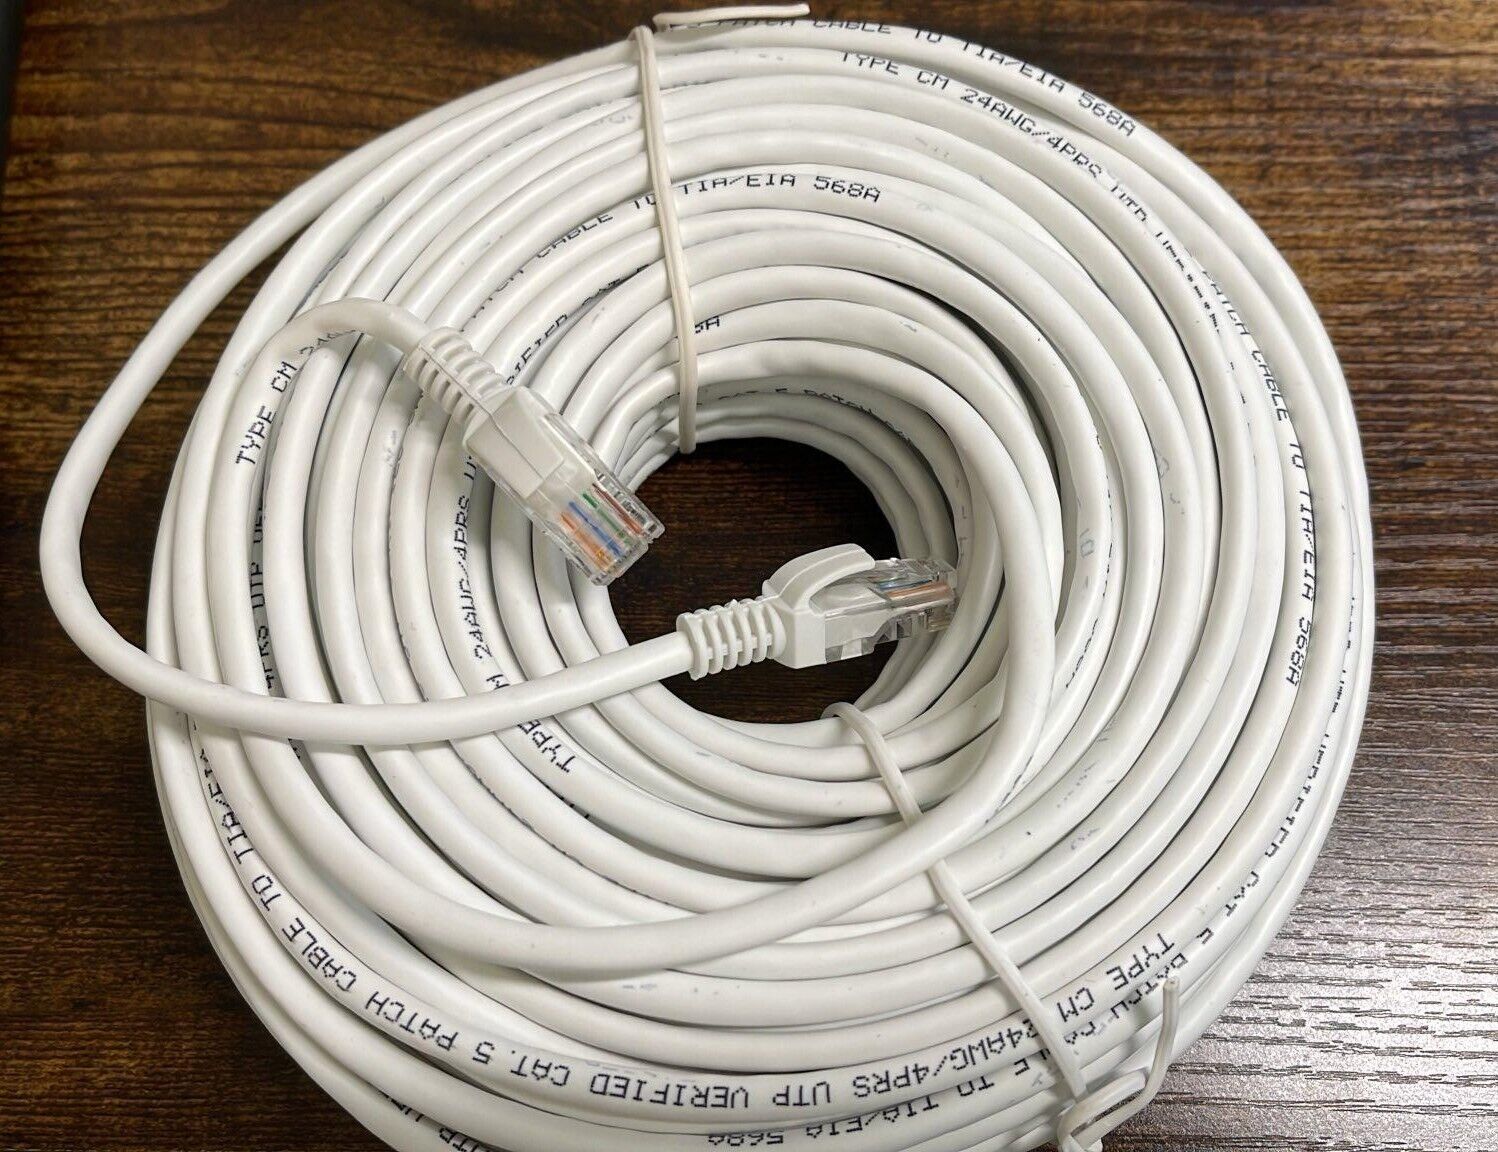 100 Feet each (LOT OF 10) Cat5e Ethernet Network Cable RJ45 White. Brand New